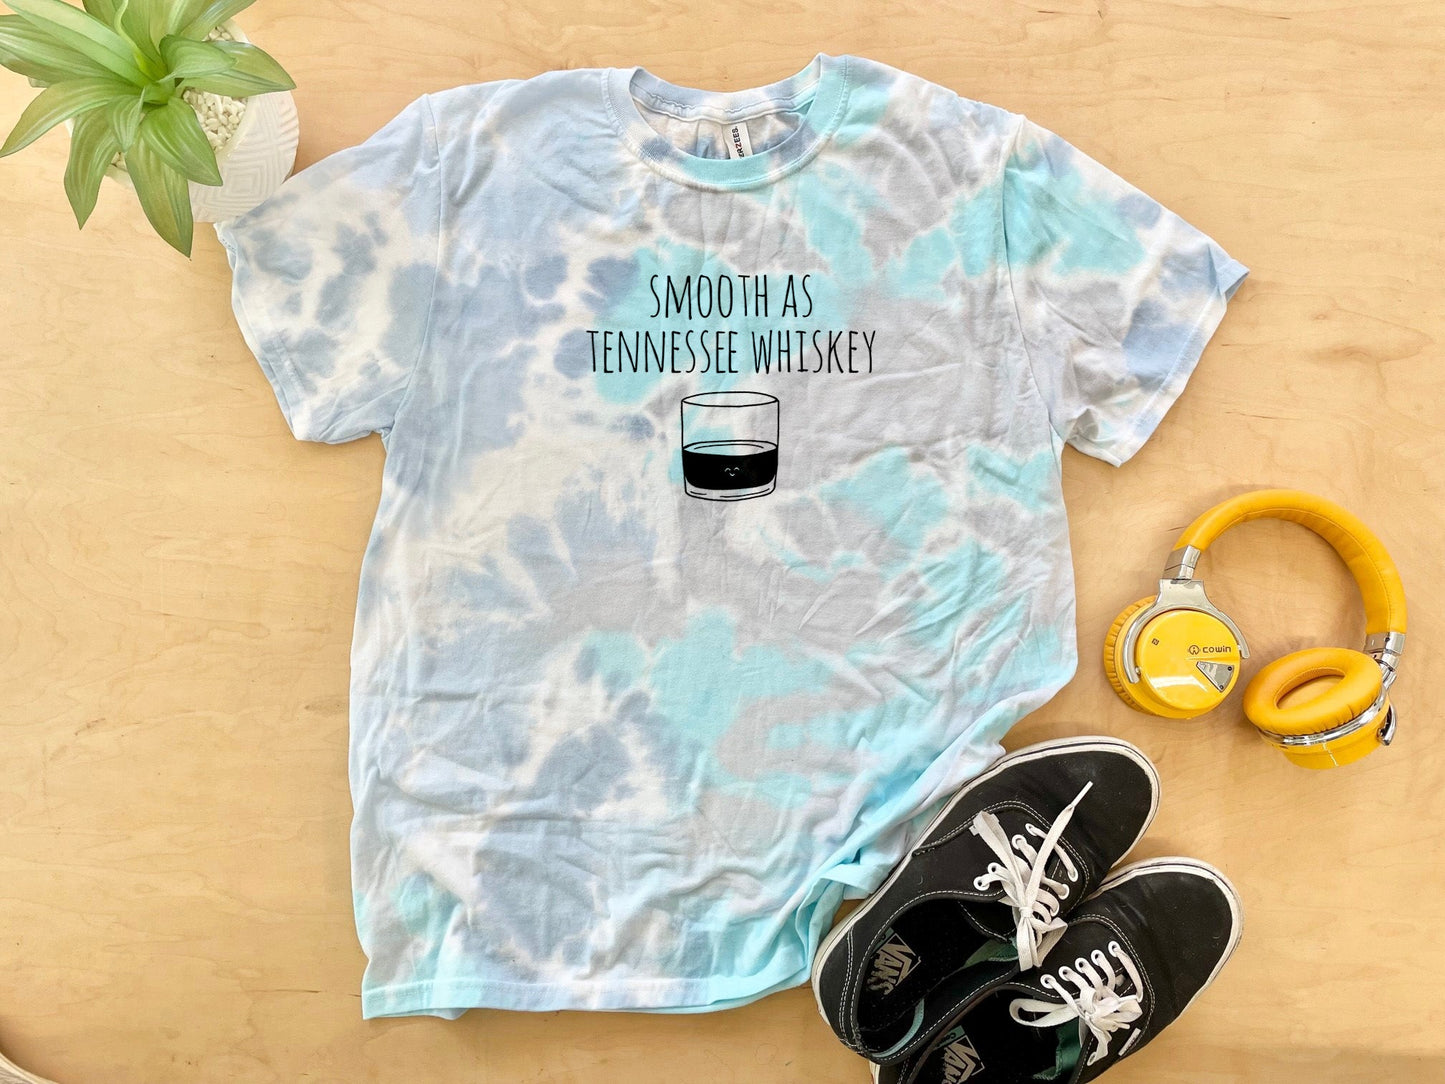 Smooth as Tennessee Whiskey - Mens/Unisex Tie Dye Tee - Blue